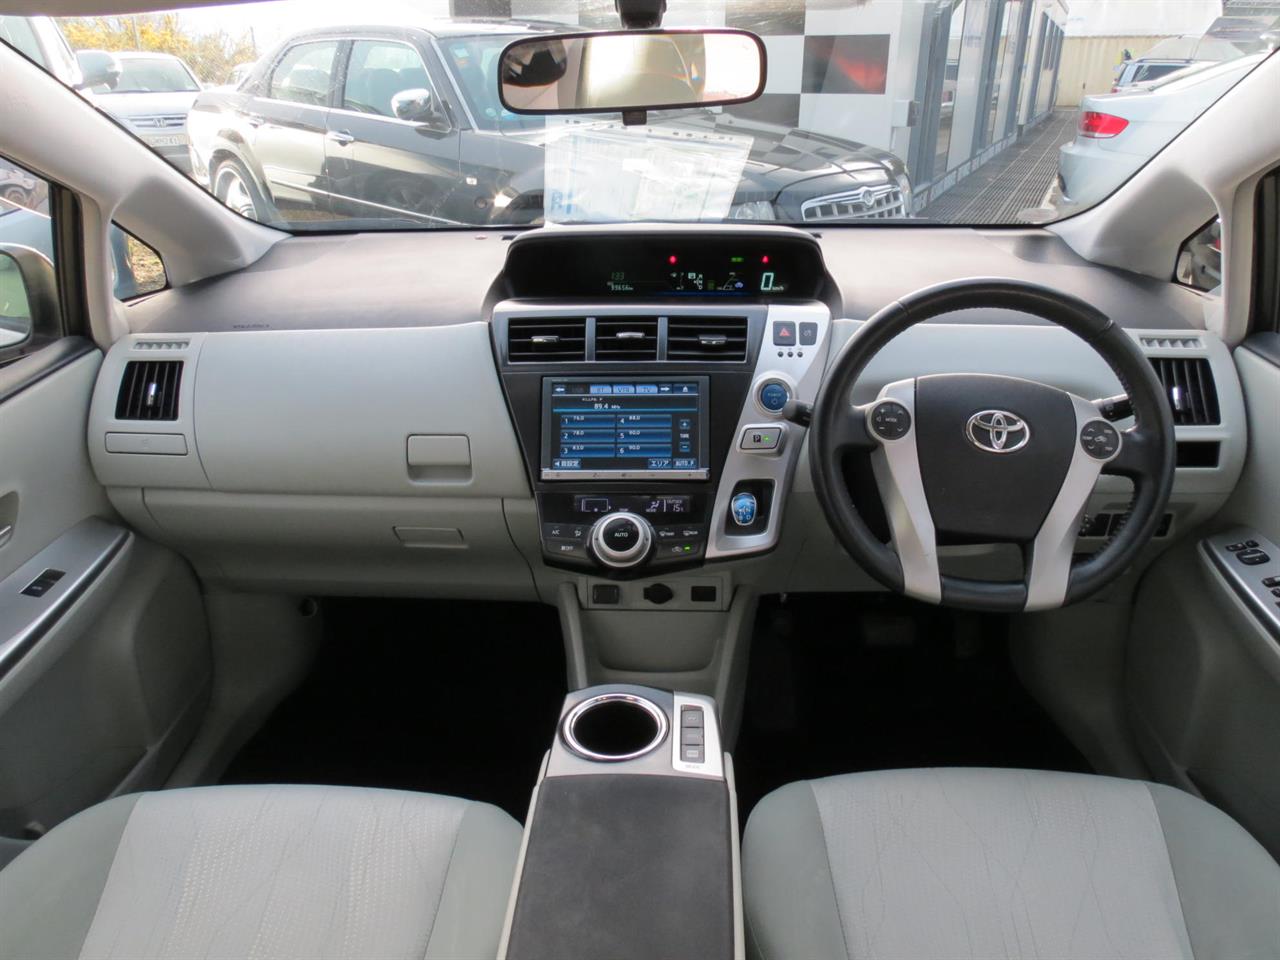 2012 Toyota Prius only $53 weekly